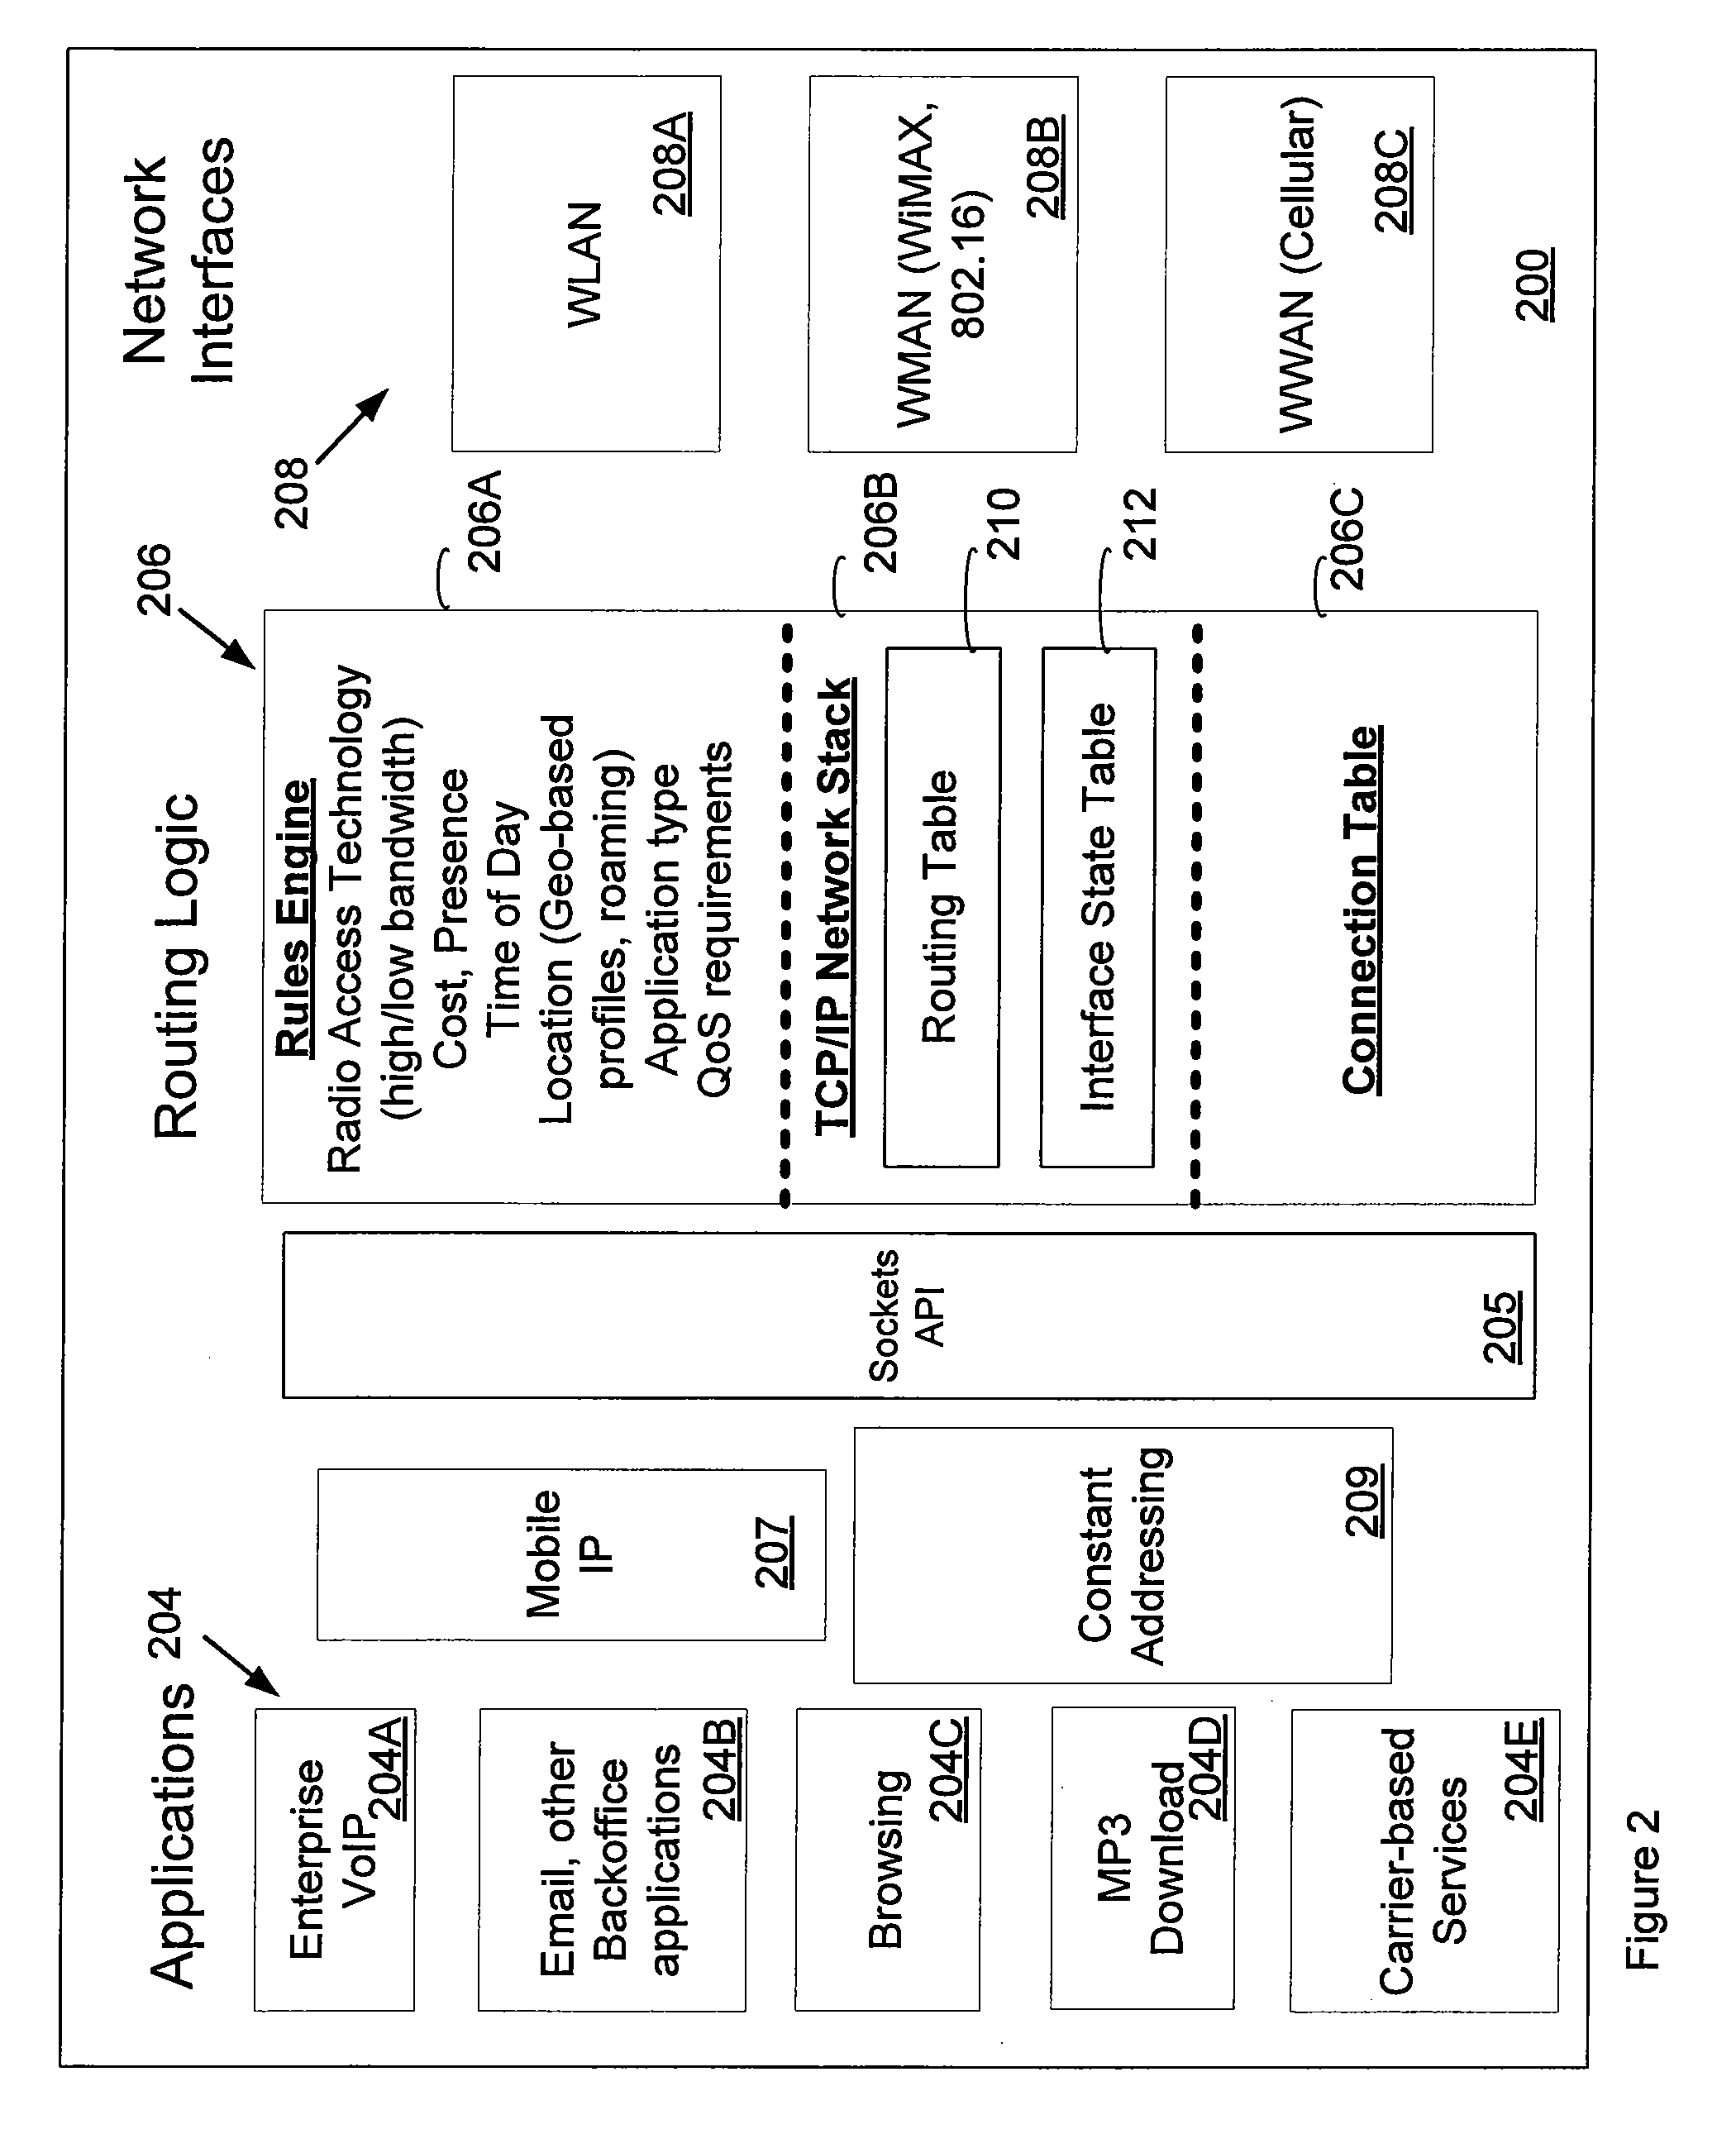 Policy-Based Data Routing For A Multi-Mode Device